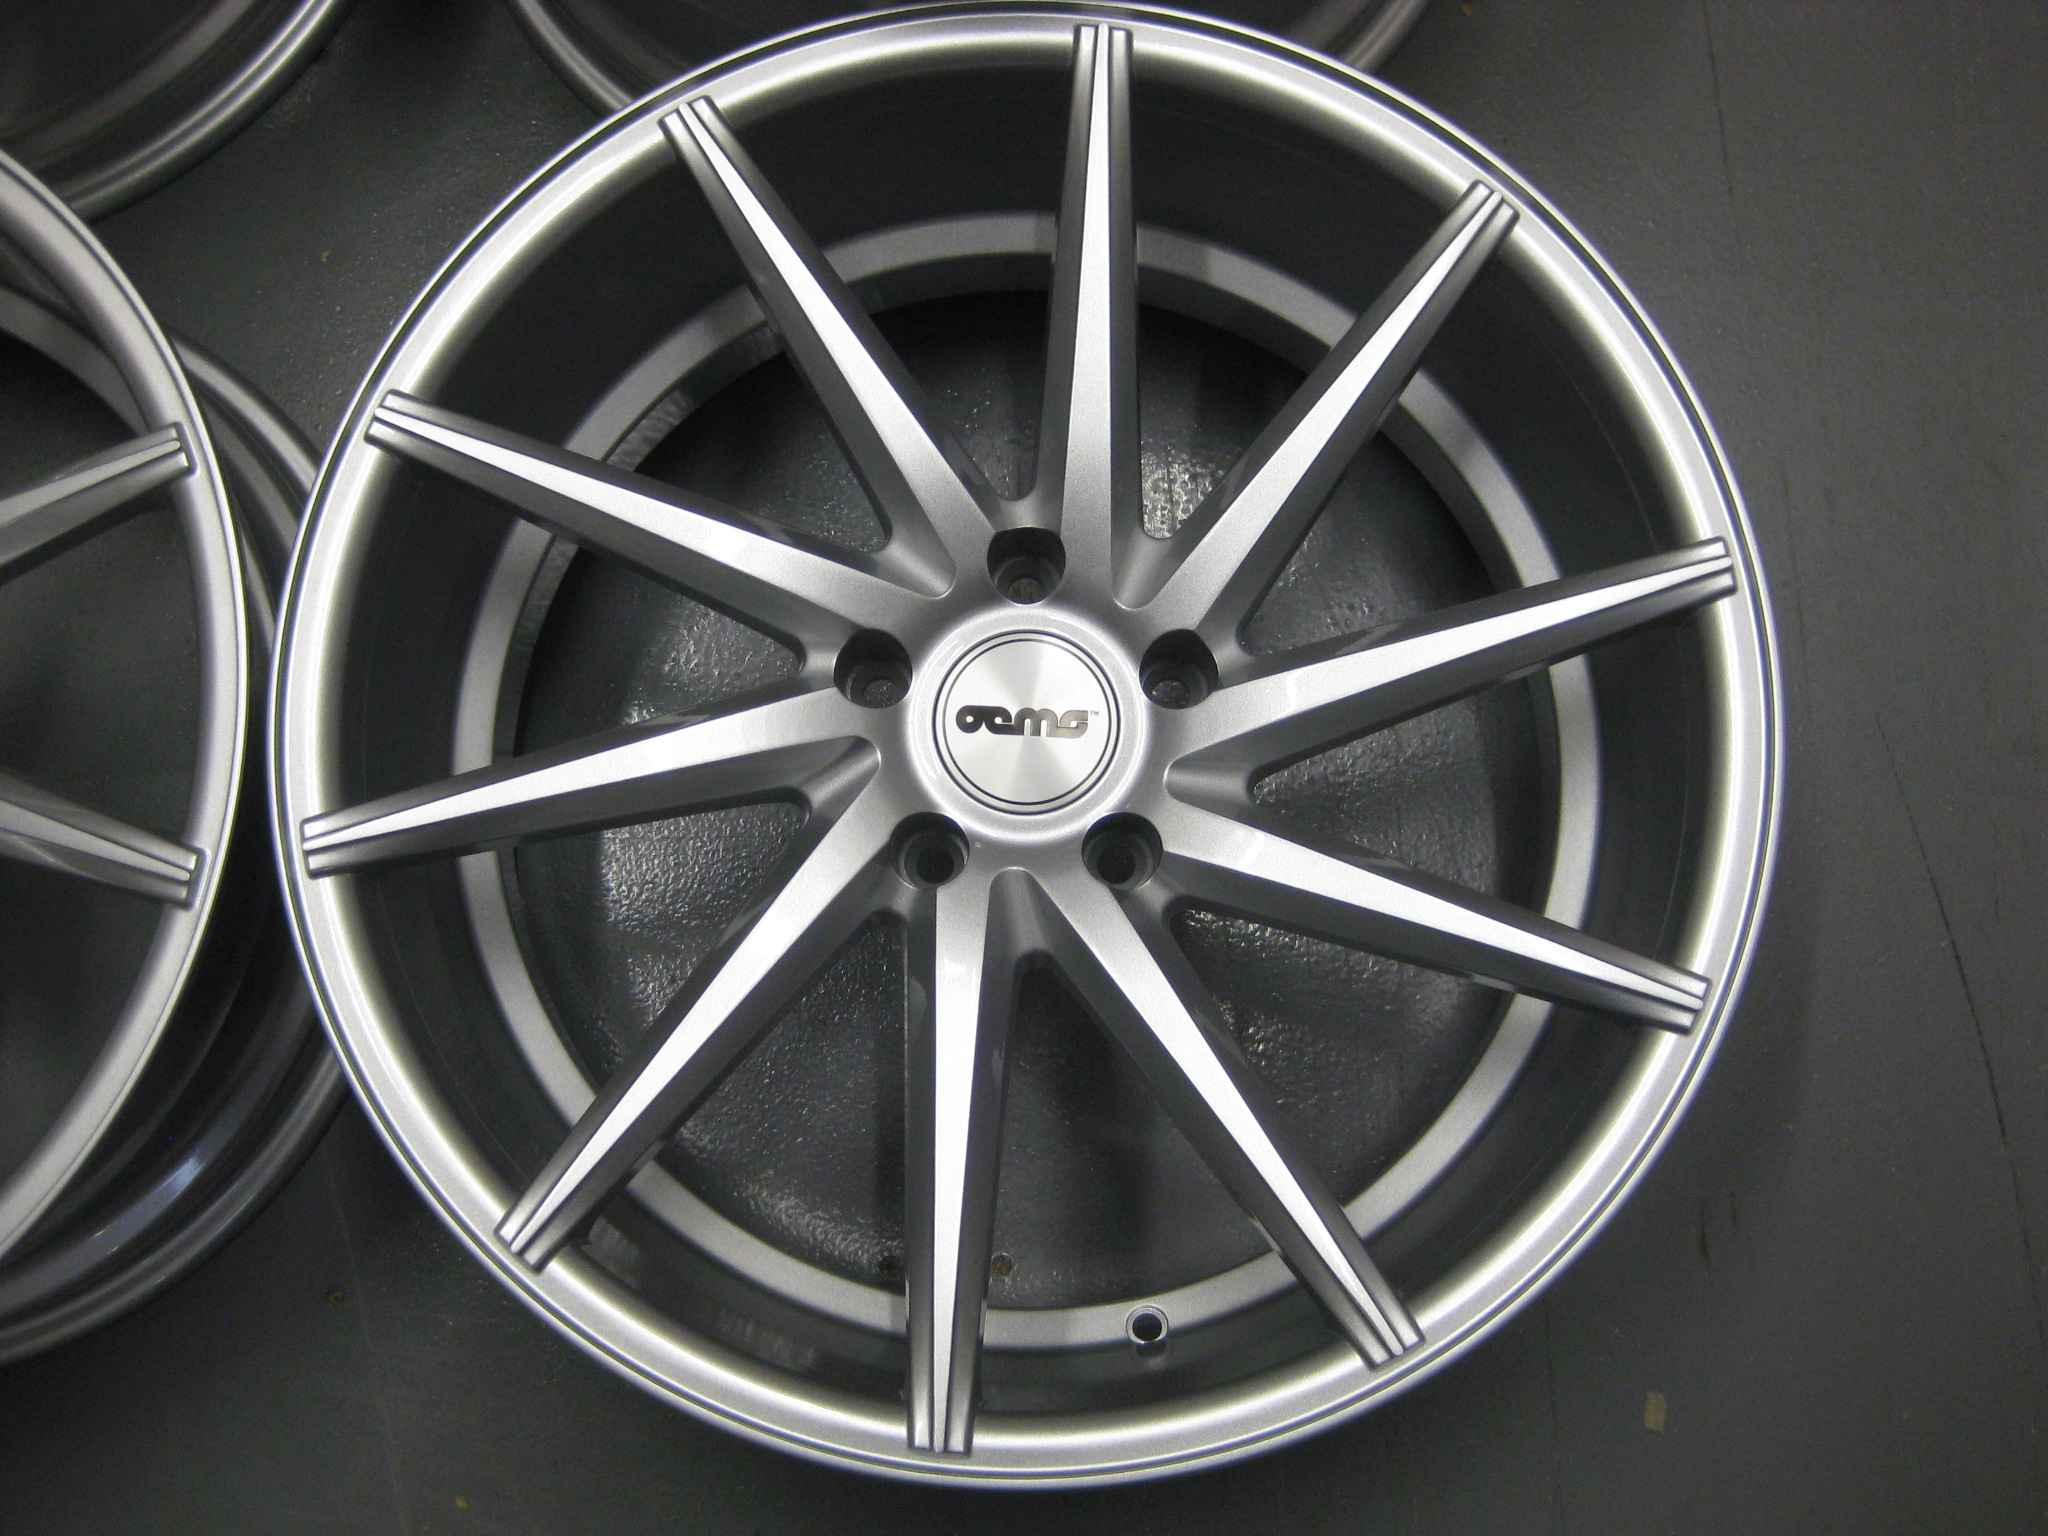 NEW 20  OEMS CVT DIRECTIONAL ALLOY WHEELS IN SILVER  WIDER 10 5  REAR